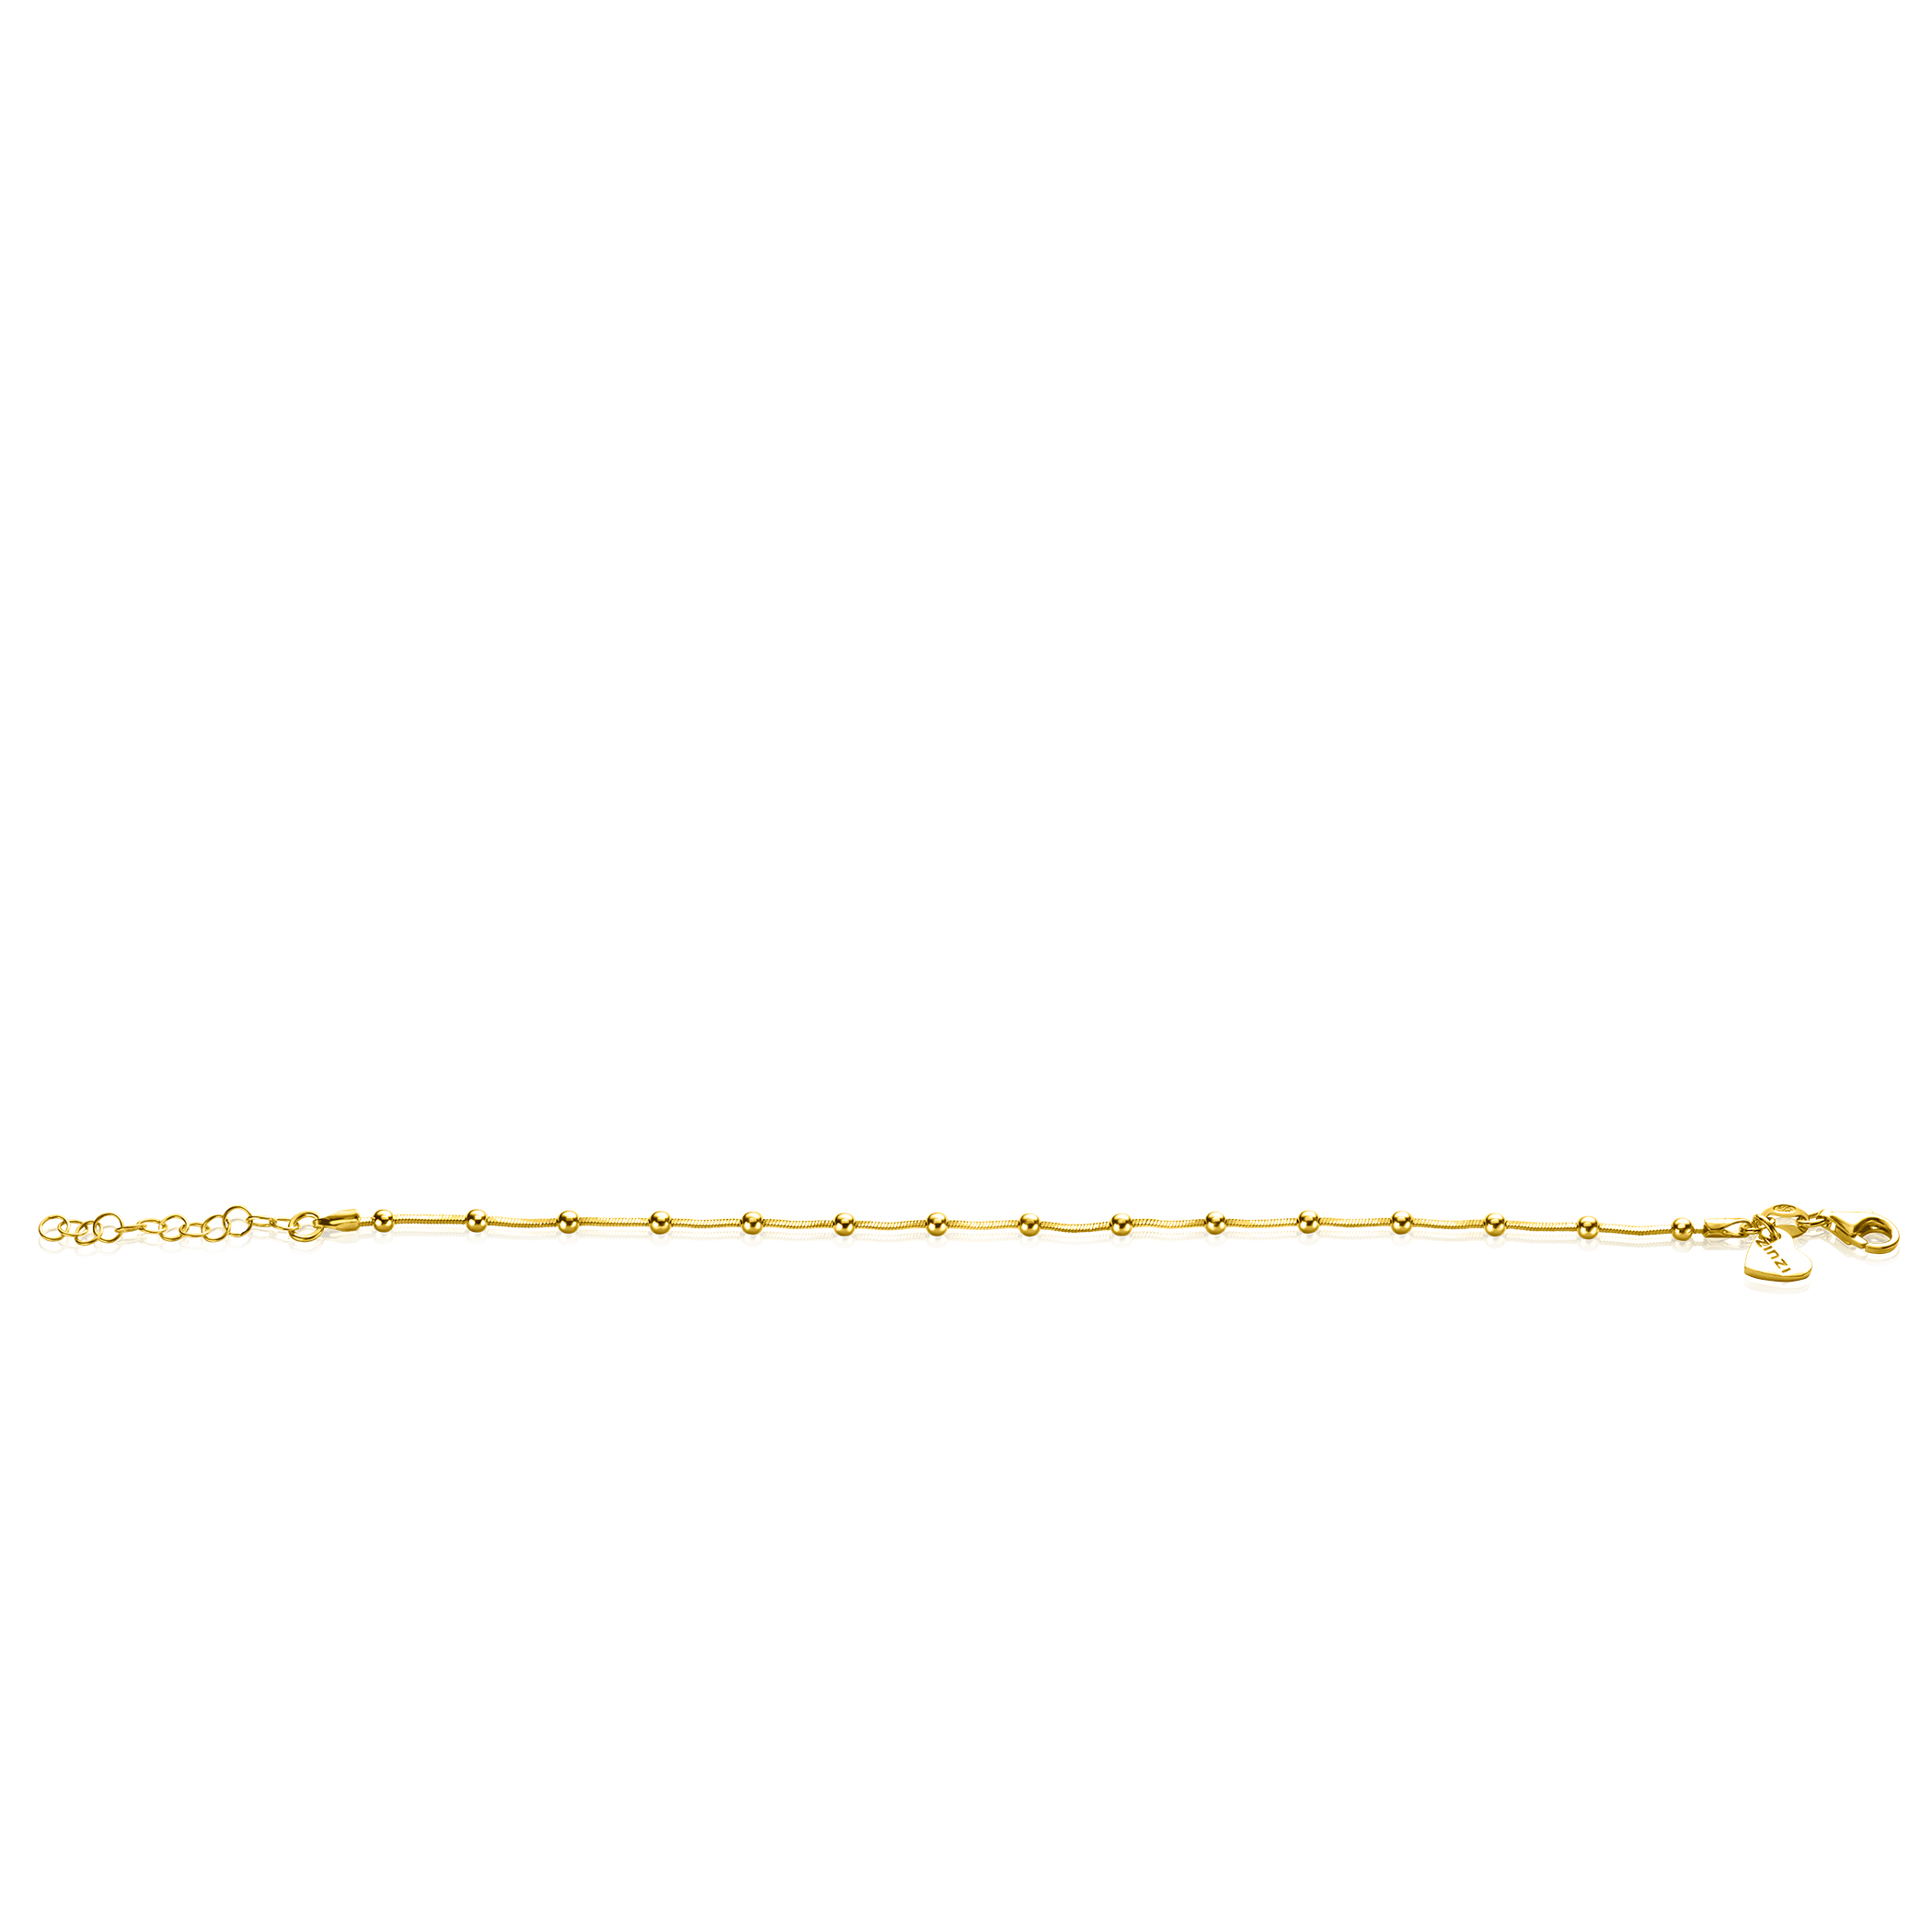 ZINZI Gold Plated Sterling Silver Snake Chain Bracelet with Square Cut Chains and 15 Refined Shiny Beads 17-20cm ZIA2471G